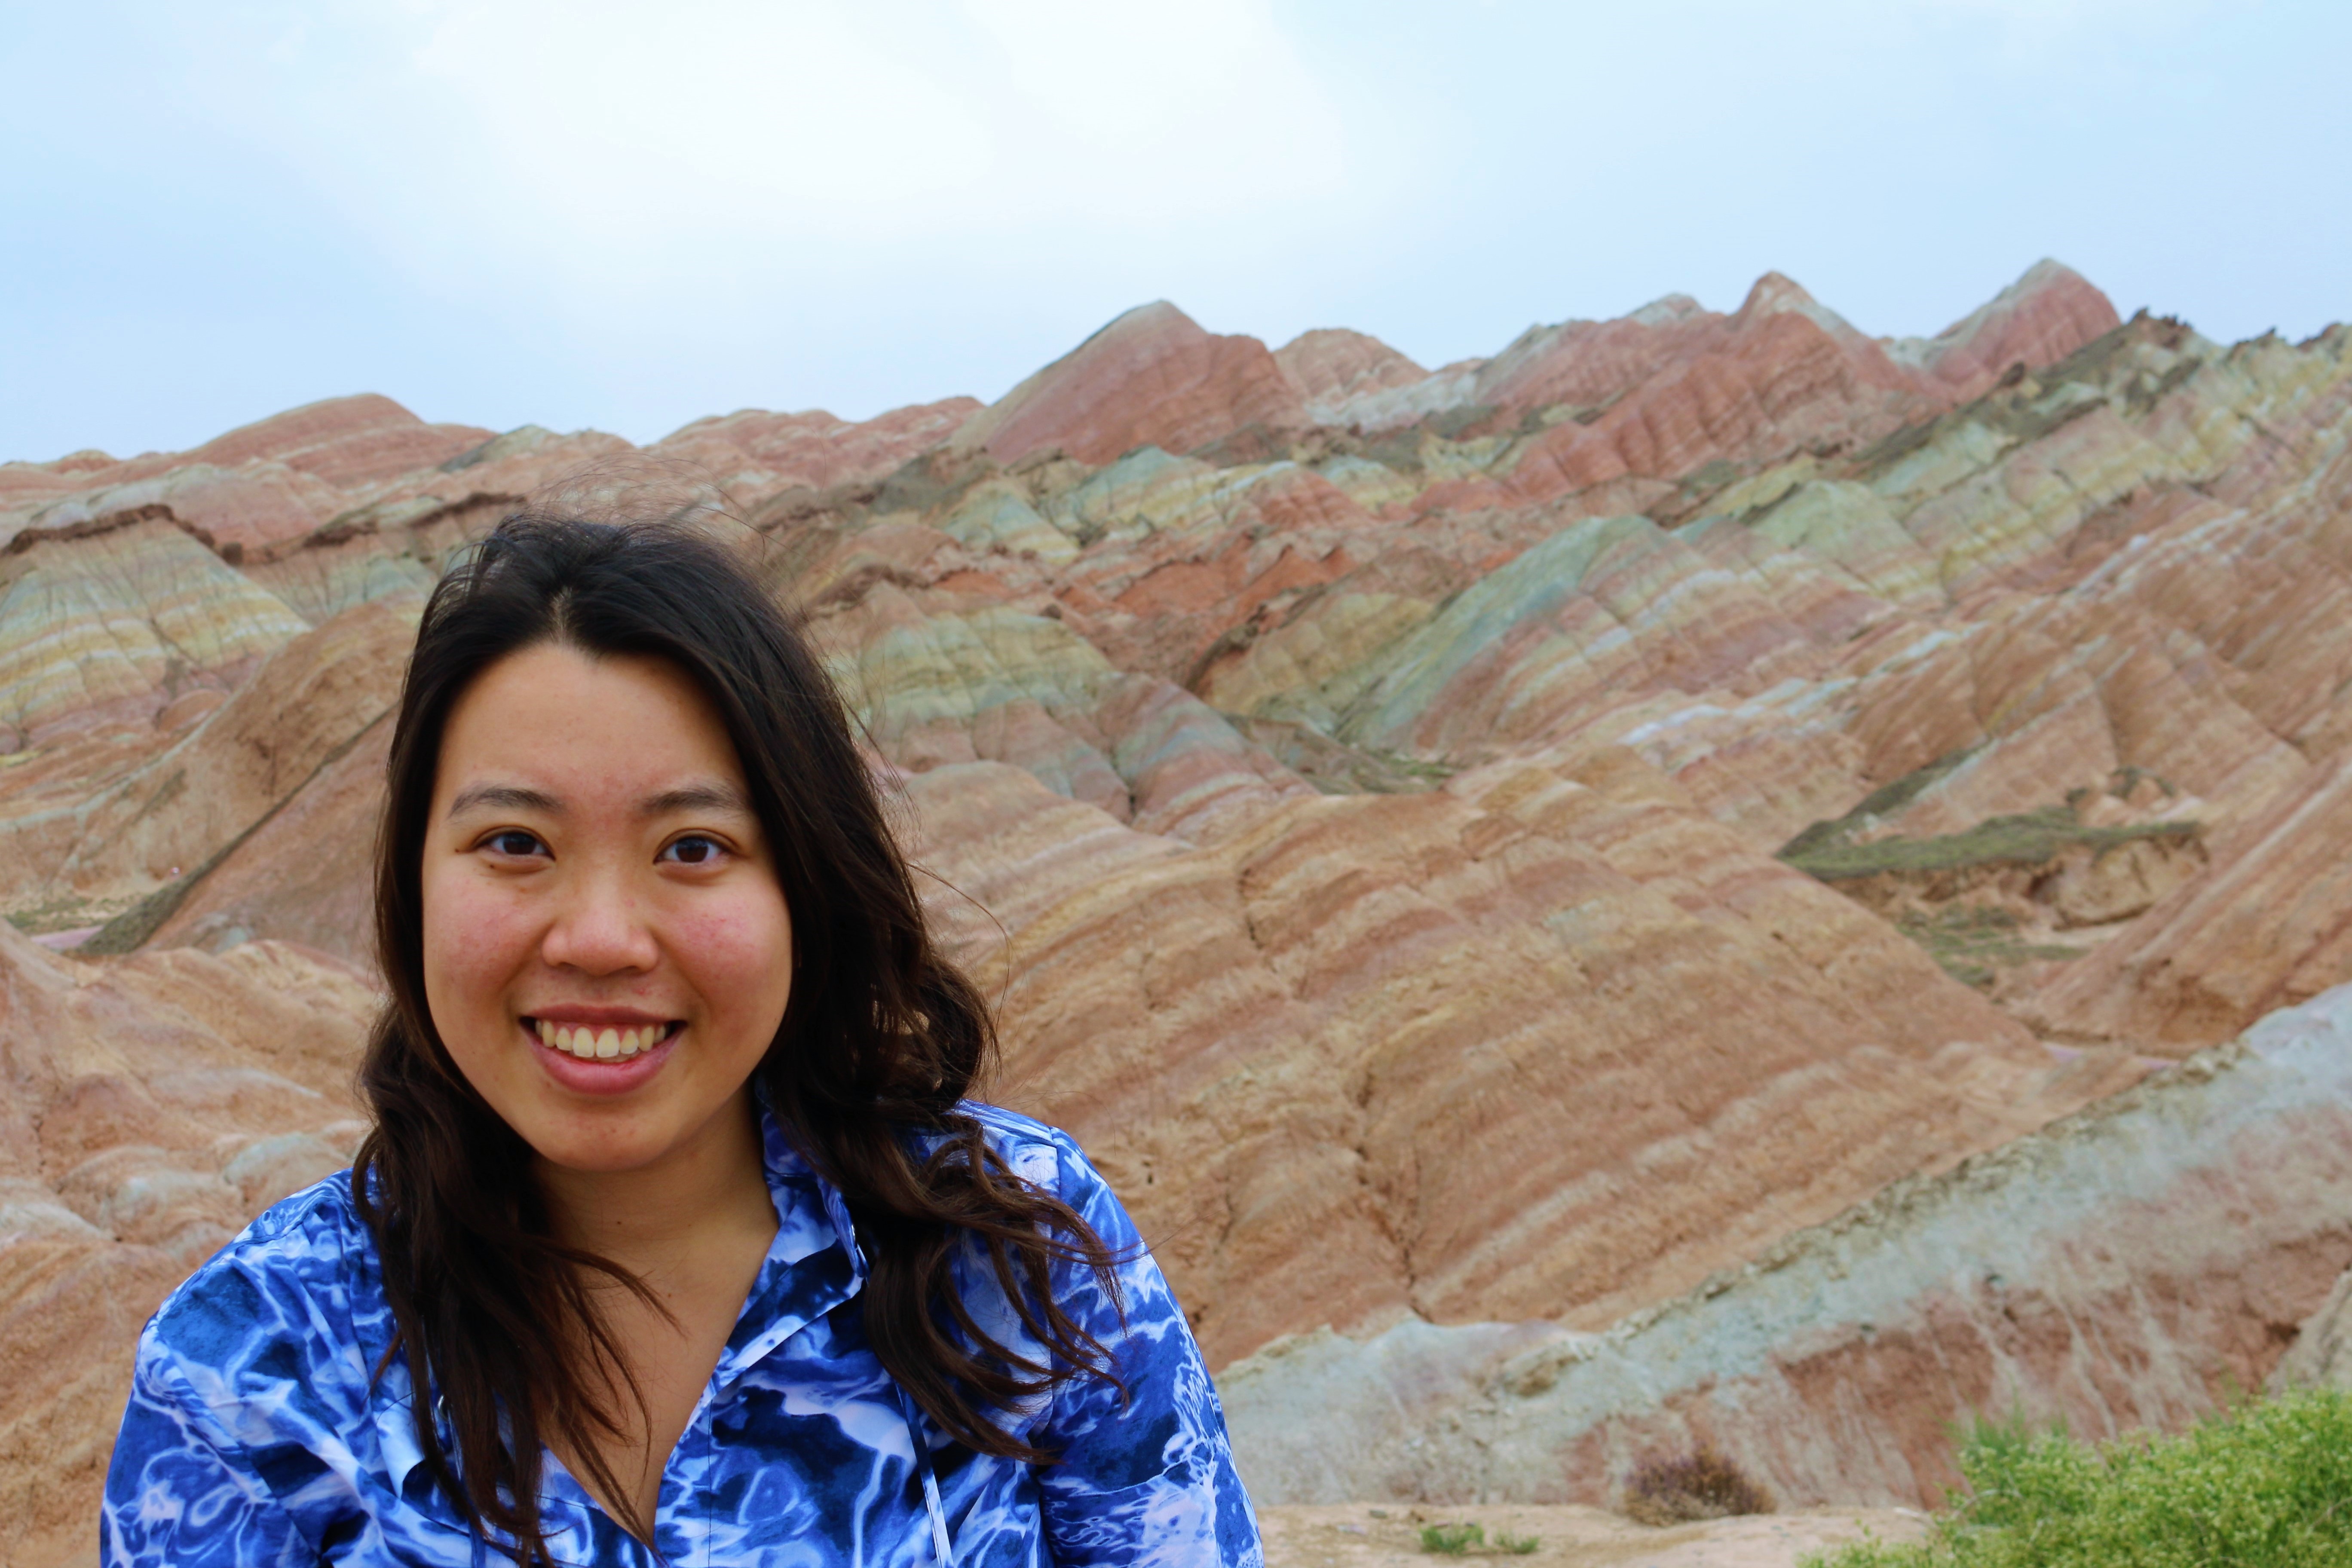 Kimberlie Le in front of a particularly colorful mountain.